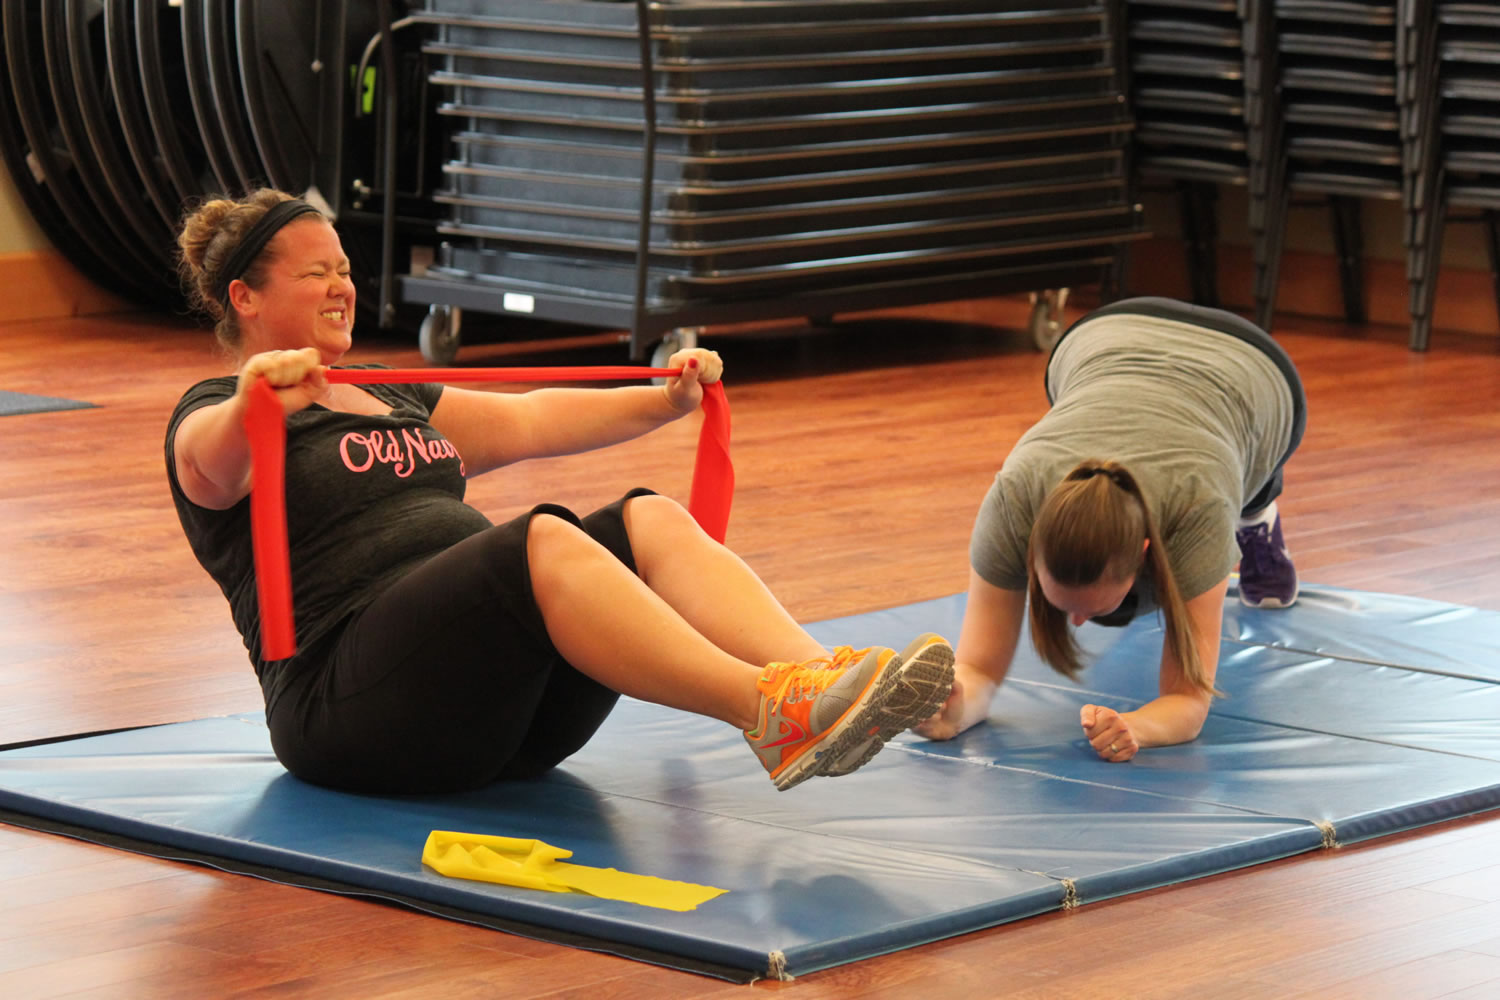 Stephens' metabolic conditioning class often includes a circuit training workout, which incorporates the use of resistance bands, punching bag, balance balls, free weights and good old fashioned body weight resistance. Krissy Barlow (left) said her participation in the class has helped to improve her physical health and appearance.